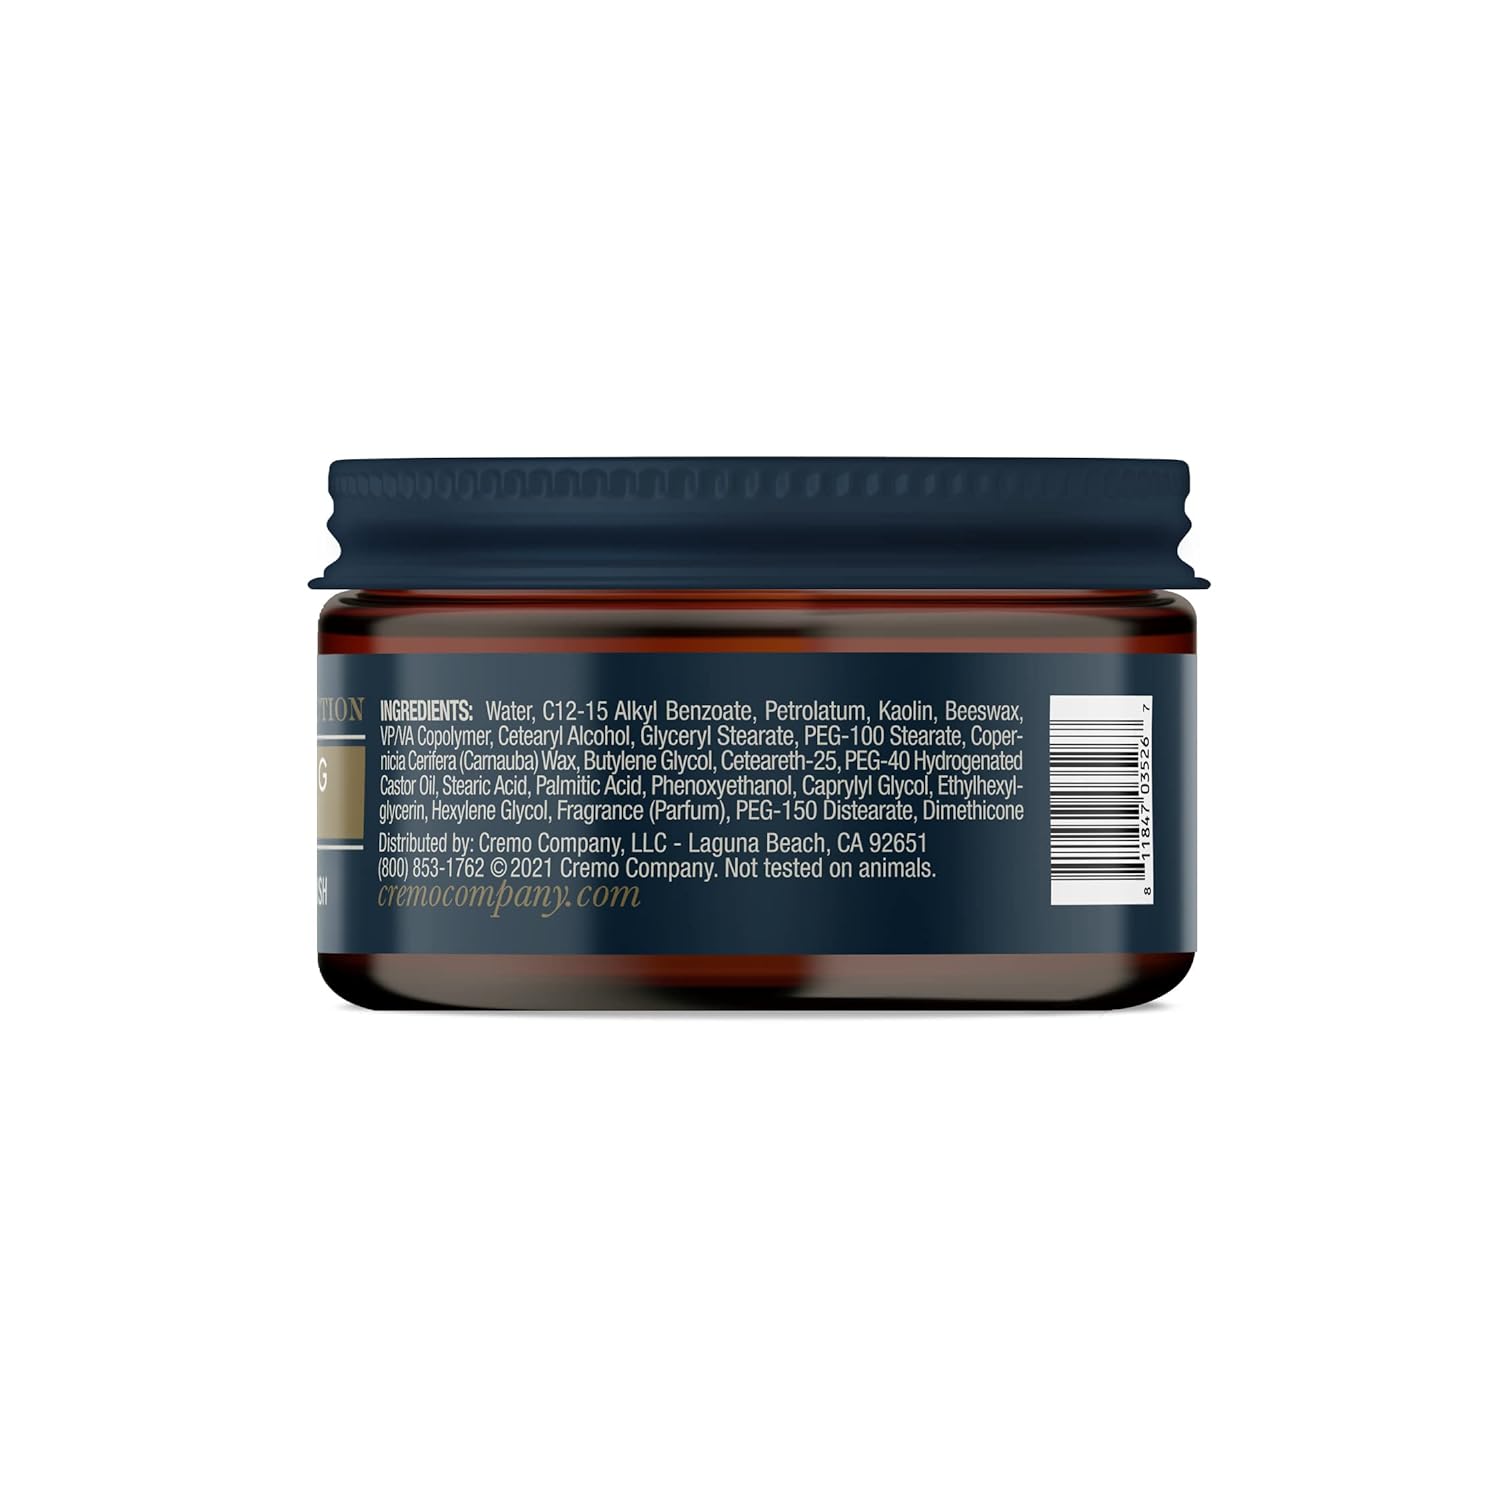 Cremo Premium Barber Grade Hair Styling Palo Santo (Reserve Collection) Sculpting Clay, High Hold, Matte Finsh, 4 Oz : Beauty & Personal Care